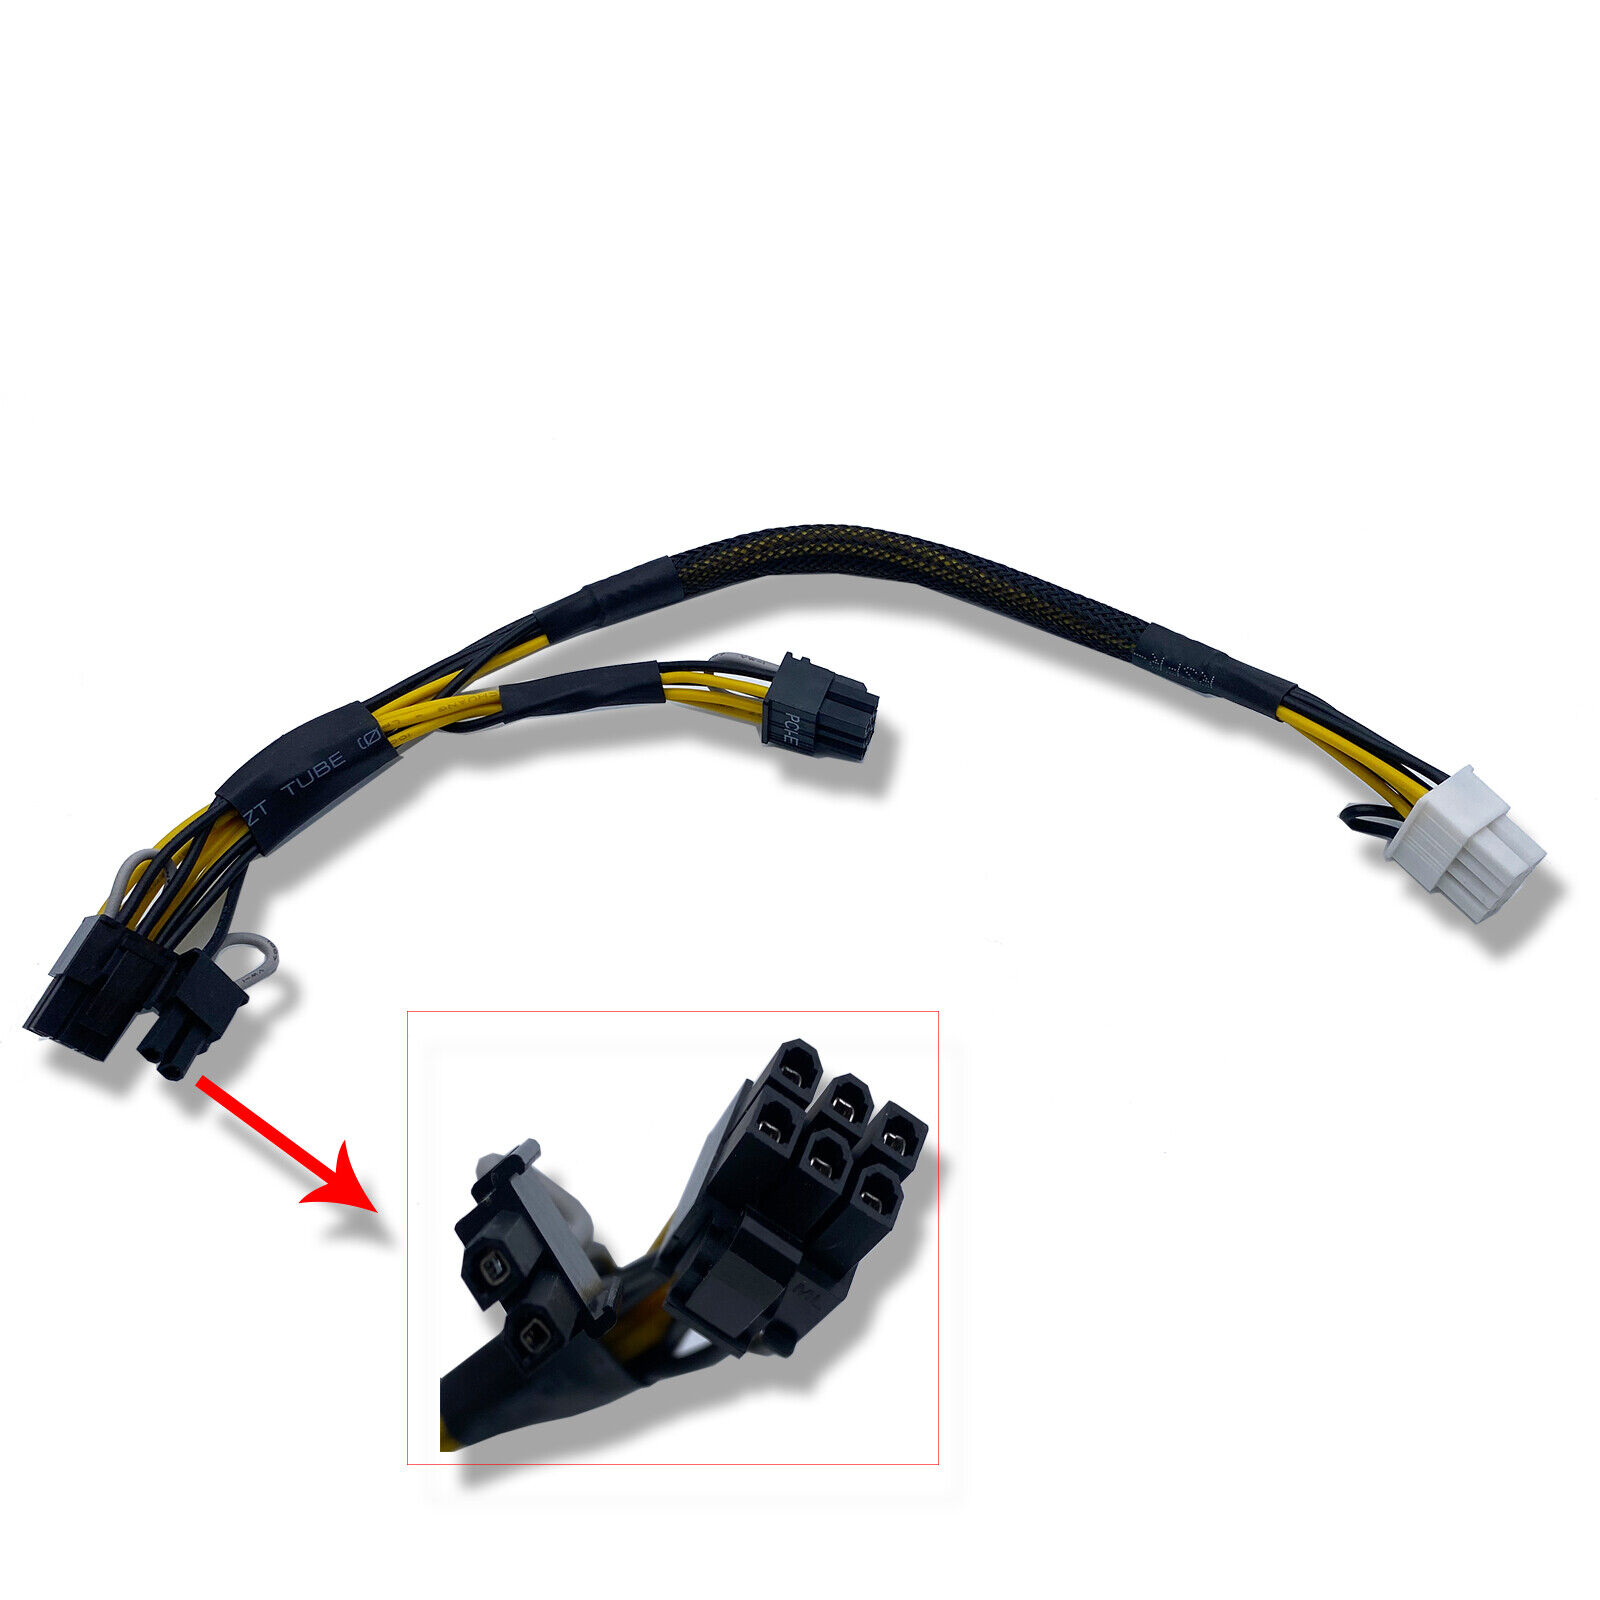 For DELL GPU POWER 09H6FV CABLE FOR POWEREDGE R730 8pin to 8+6pin 14Pin 0N08NH